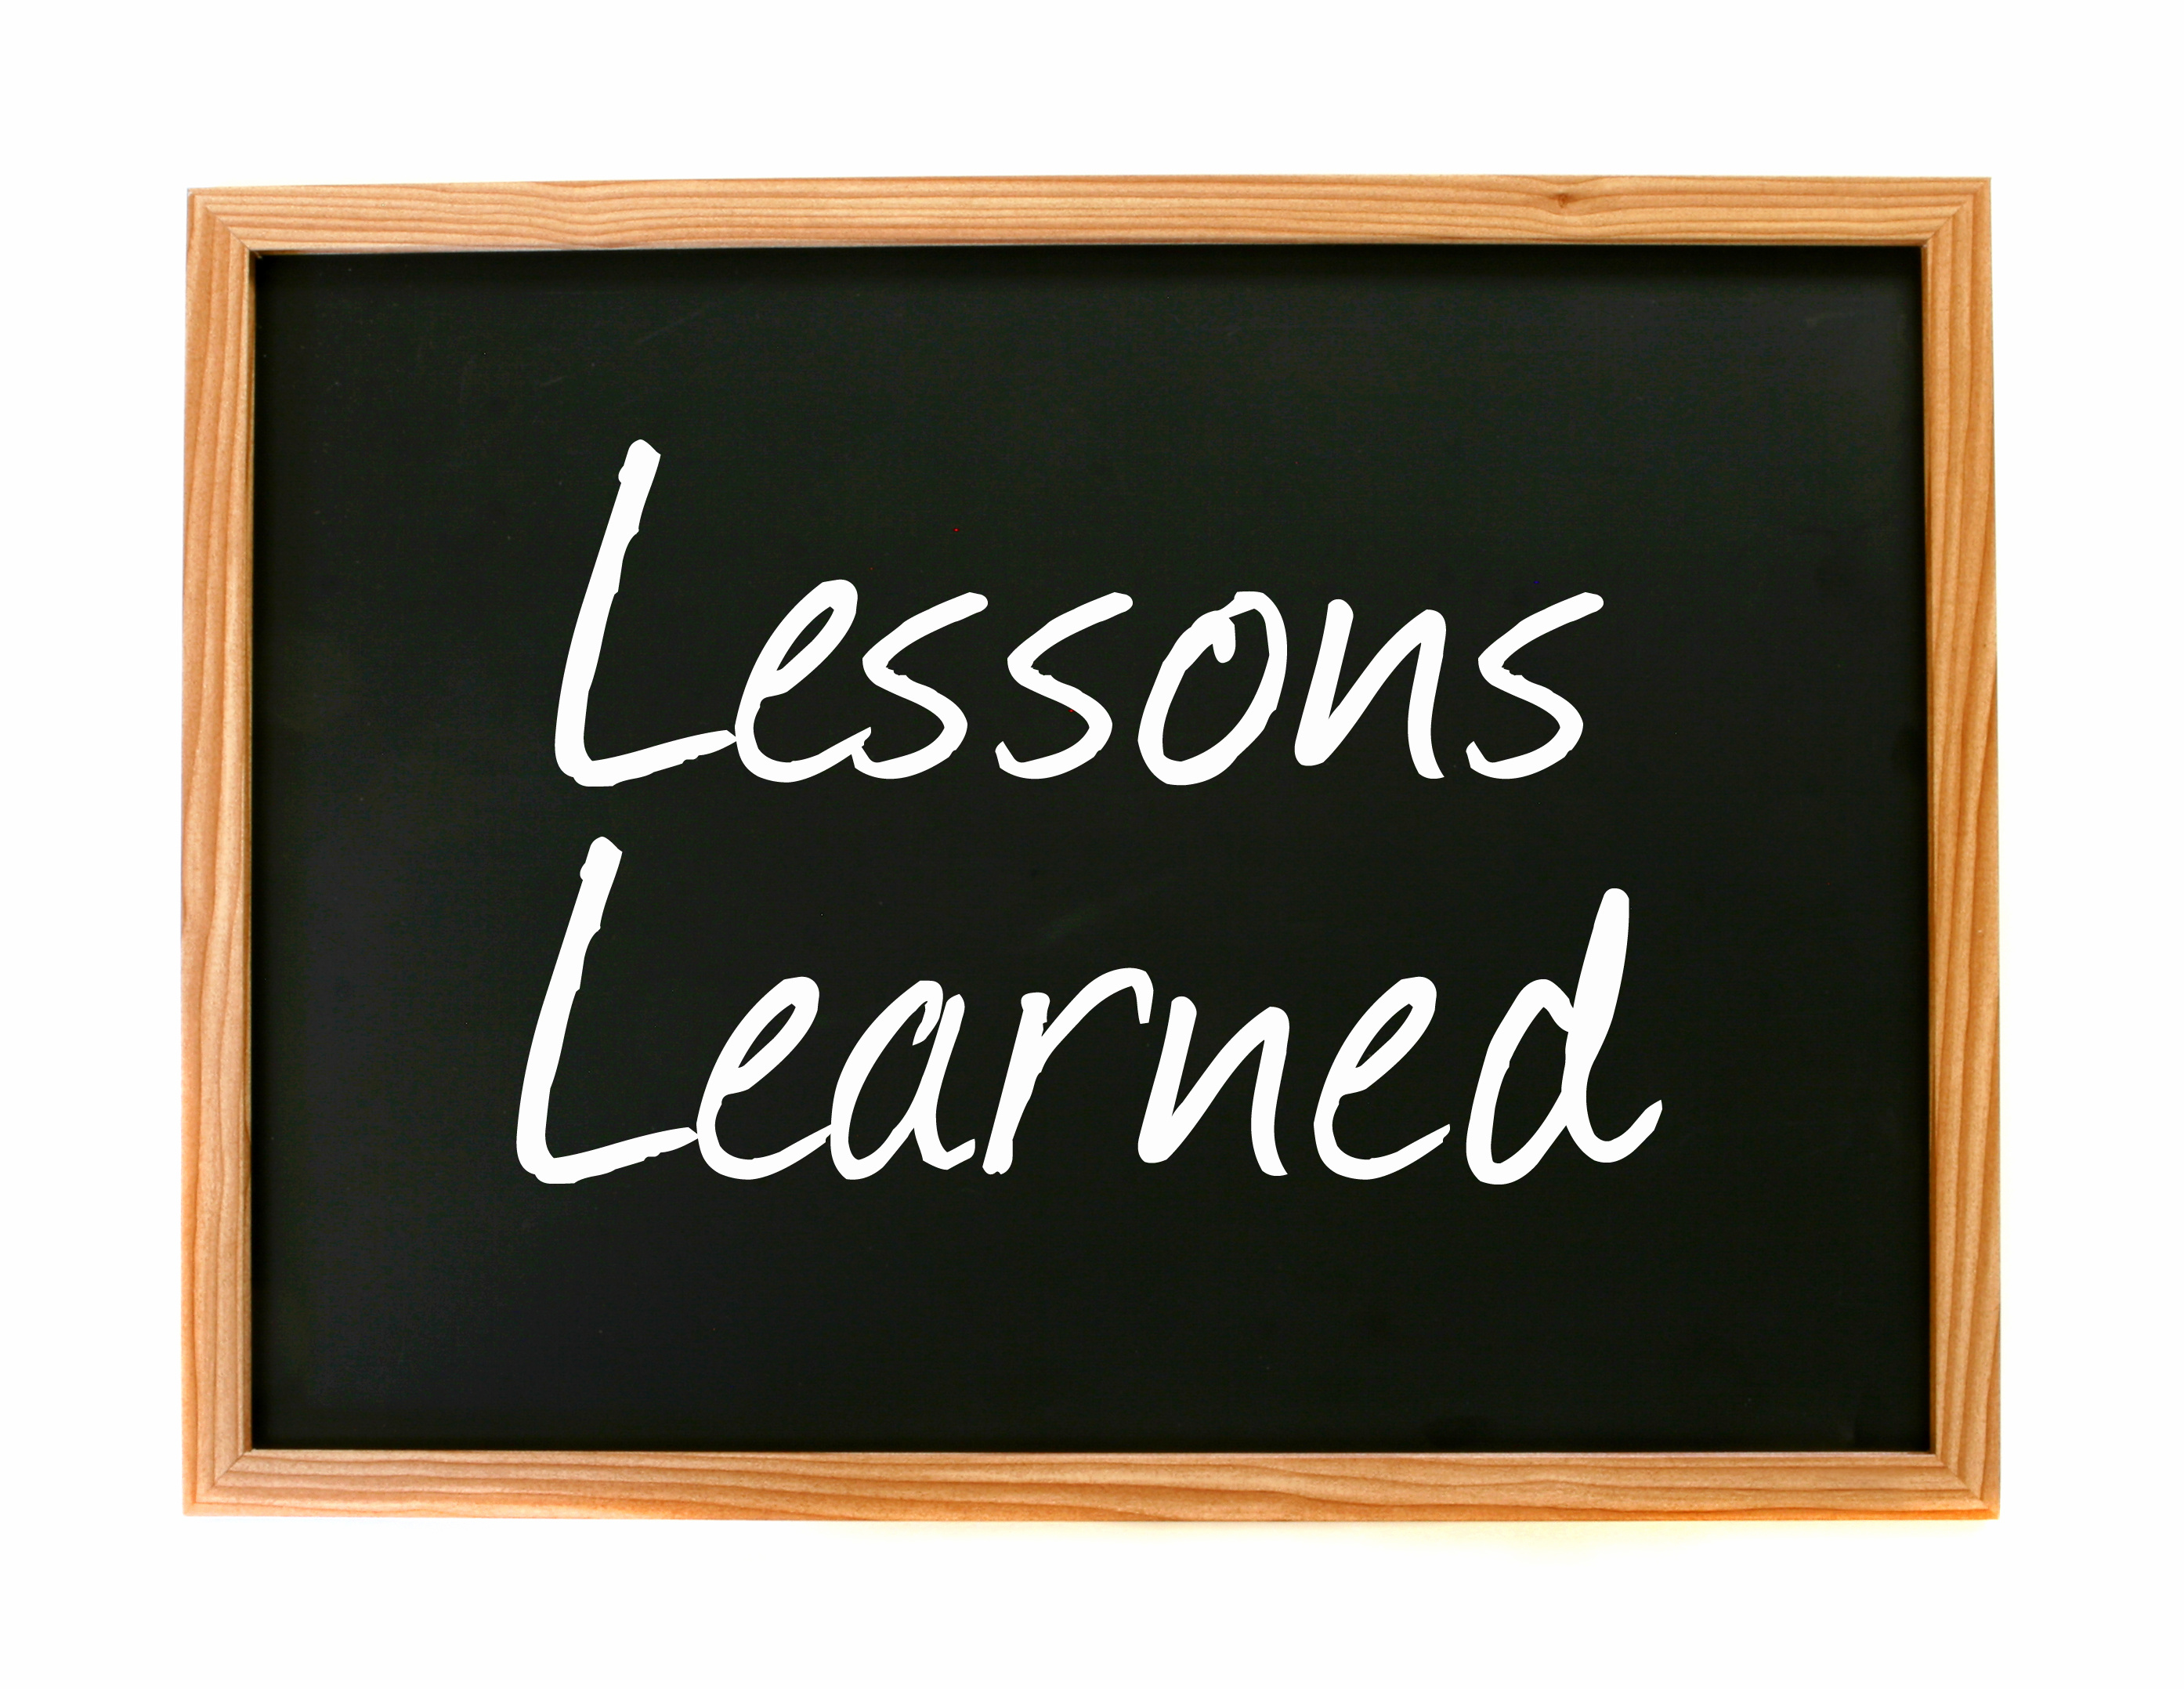 Lessons learned. Lessons learned картинки. Life Lessons. What i've learned.